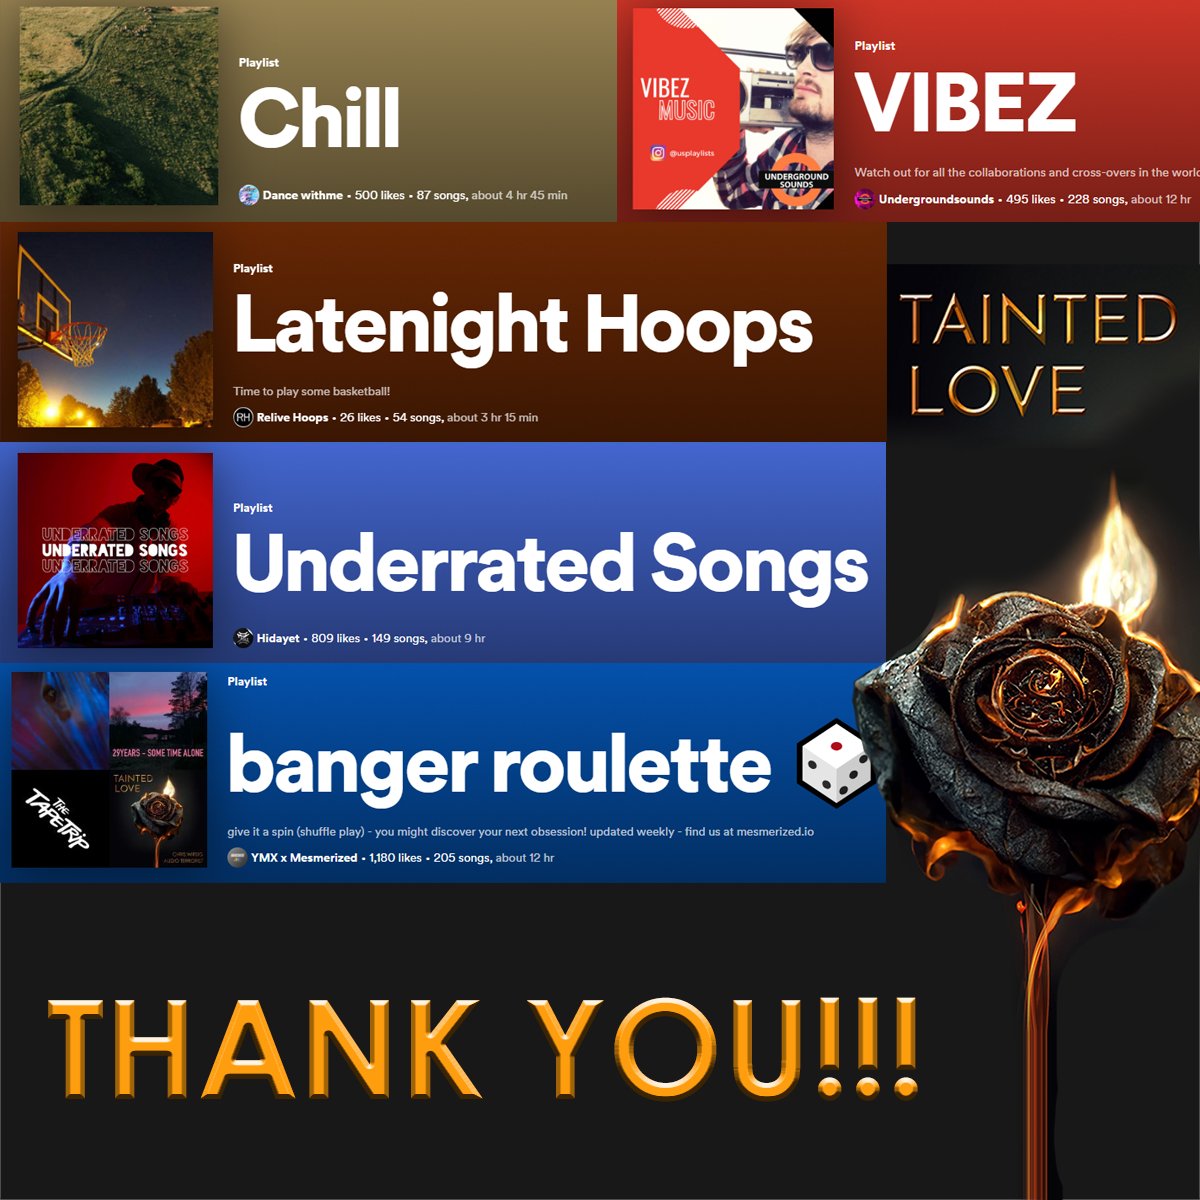 More 🖤 4 TAINTED LOVE - Thanks to Undergound Sounds, @itsmesmerized, Zeno Music, @relivehoops for adding our edgy cover to your cool @Spotify playlists!😀🙏
Check them out!
Listen: ffm.to/taintedlove

Chris Wirsig & @AudioTerrorist

#chriswirsig #audioterrorist #taintedlove